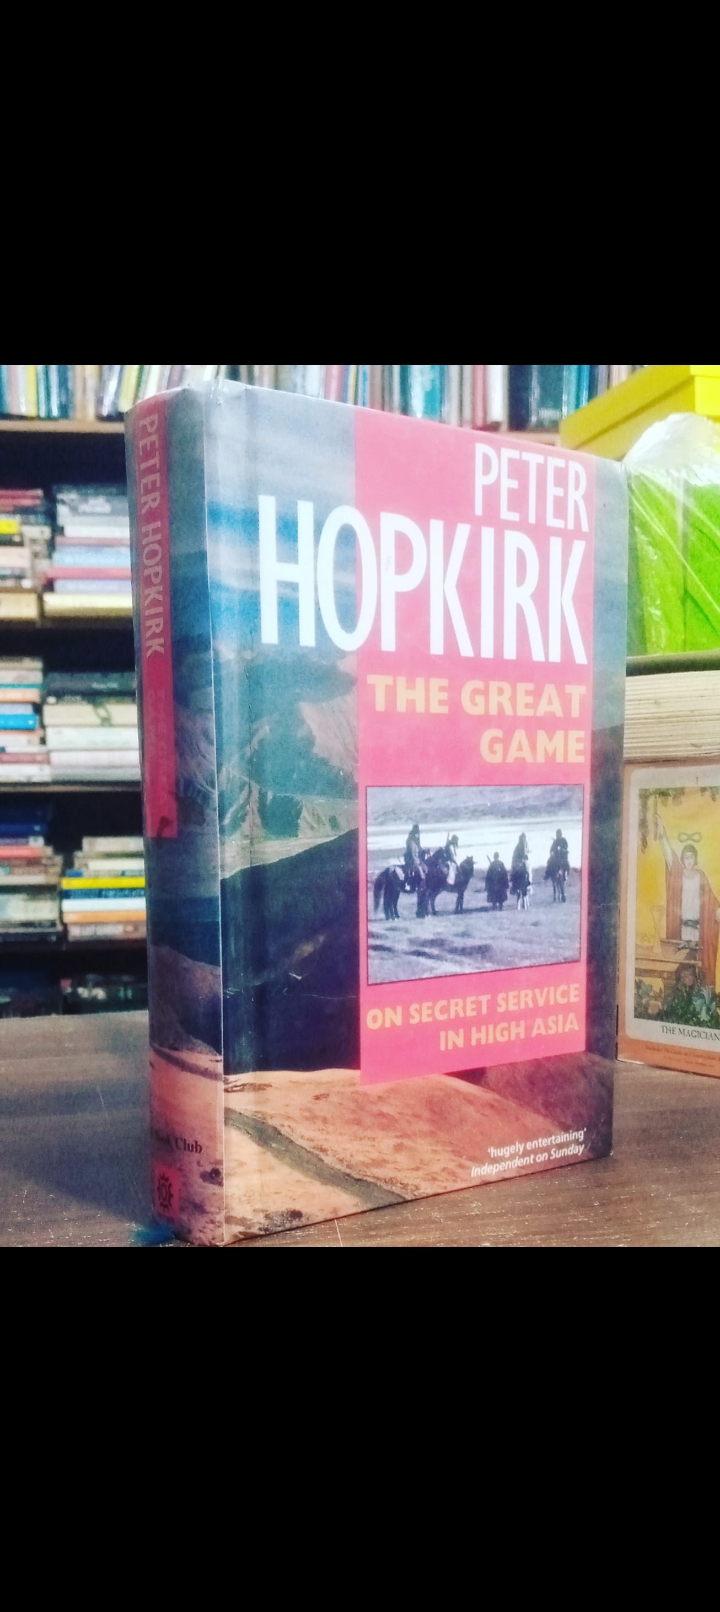 the great game on secret service in high asia by peter hopkirk.original hardcover